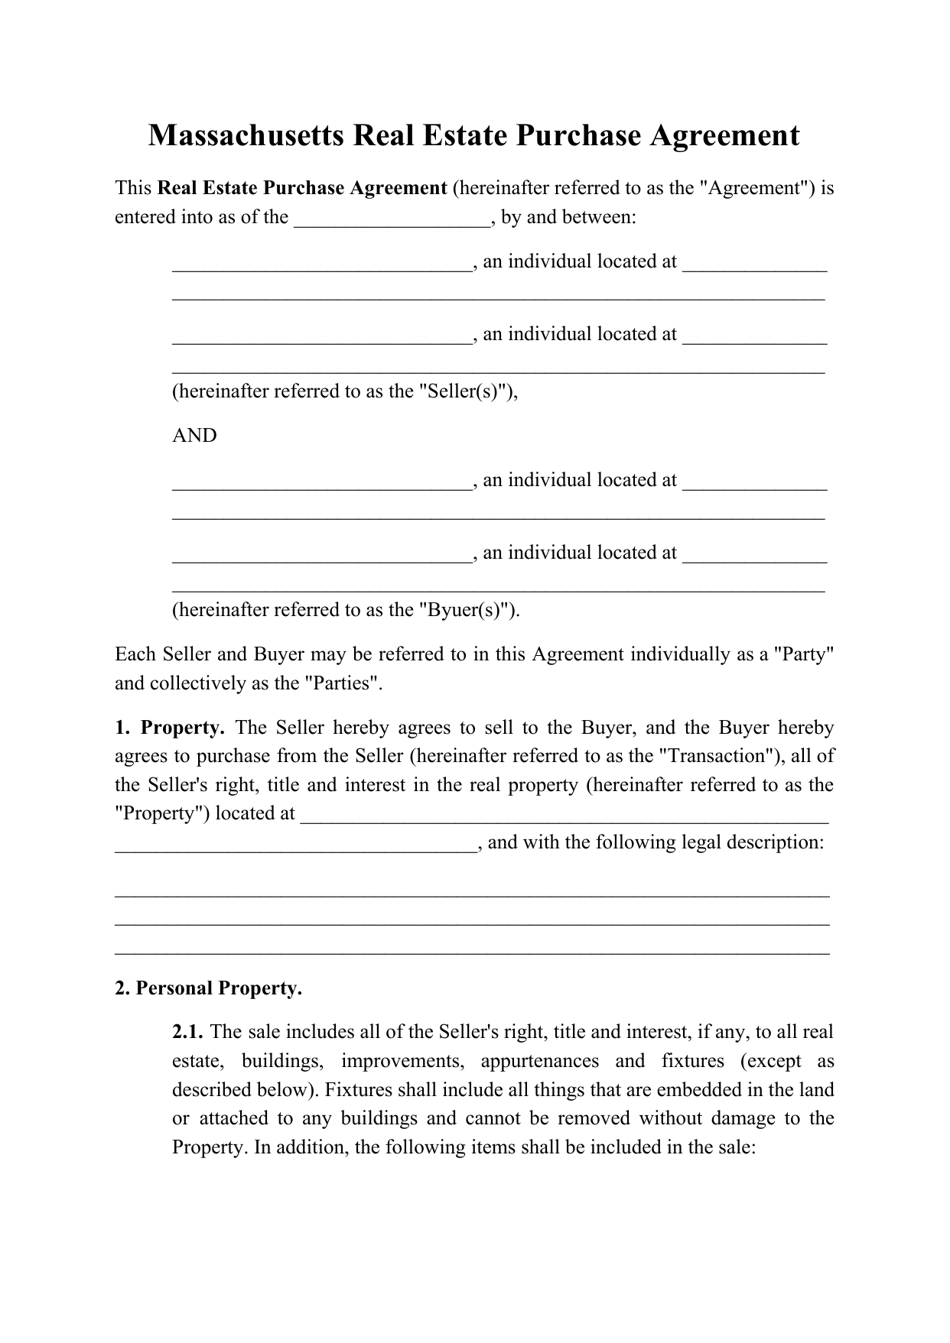 massachusetts-real-estate-purchase-agreement-template-fill-out-sign